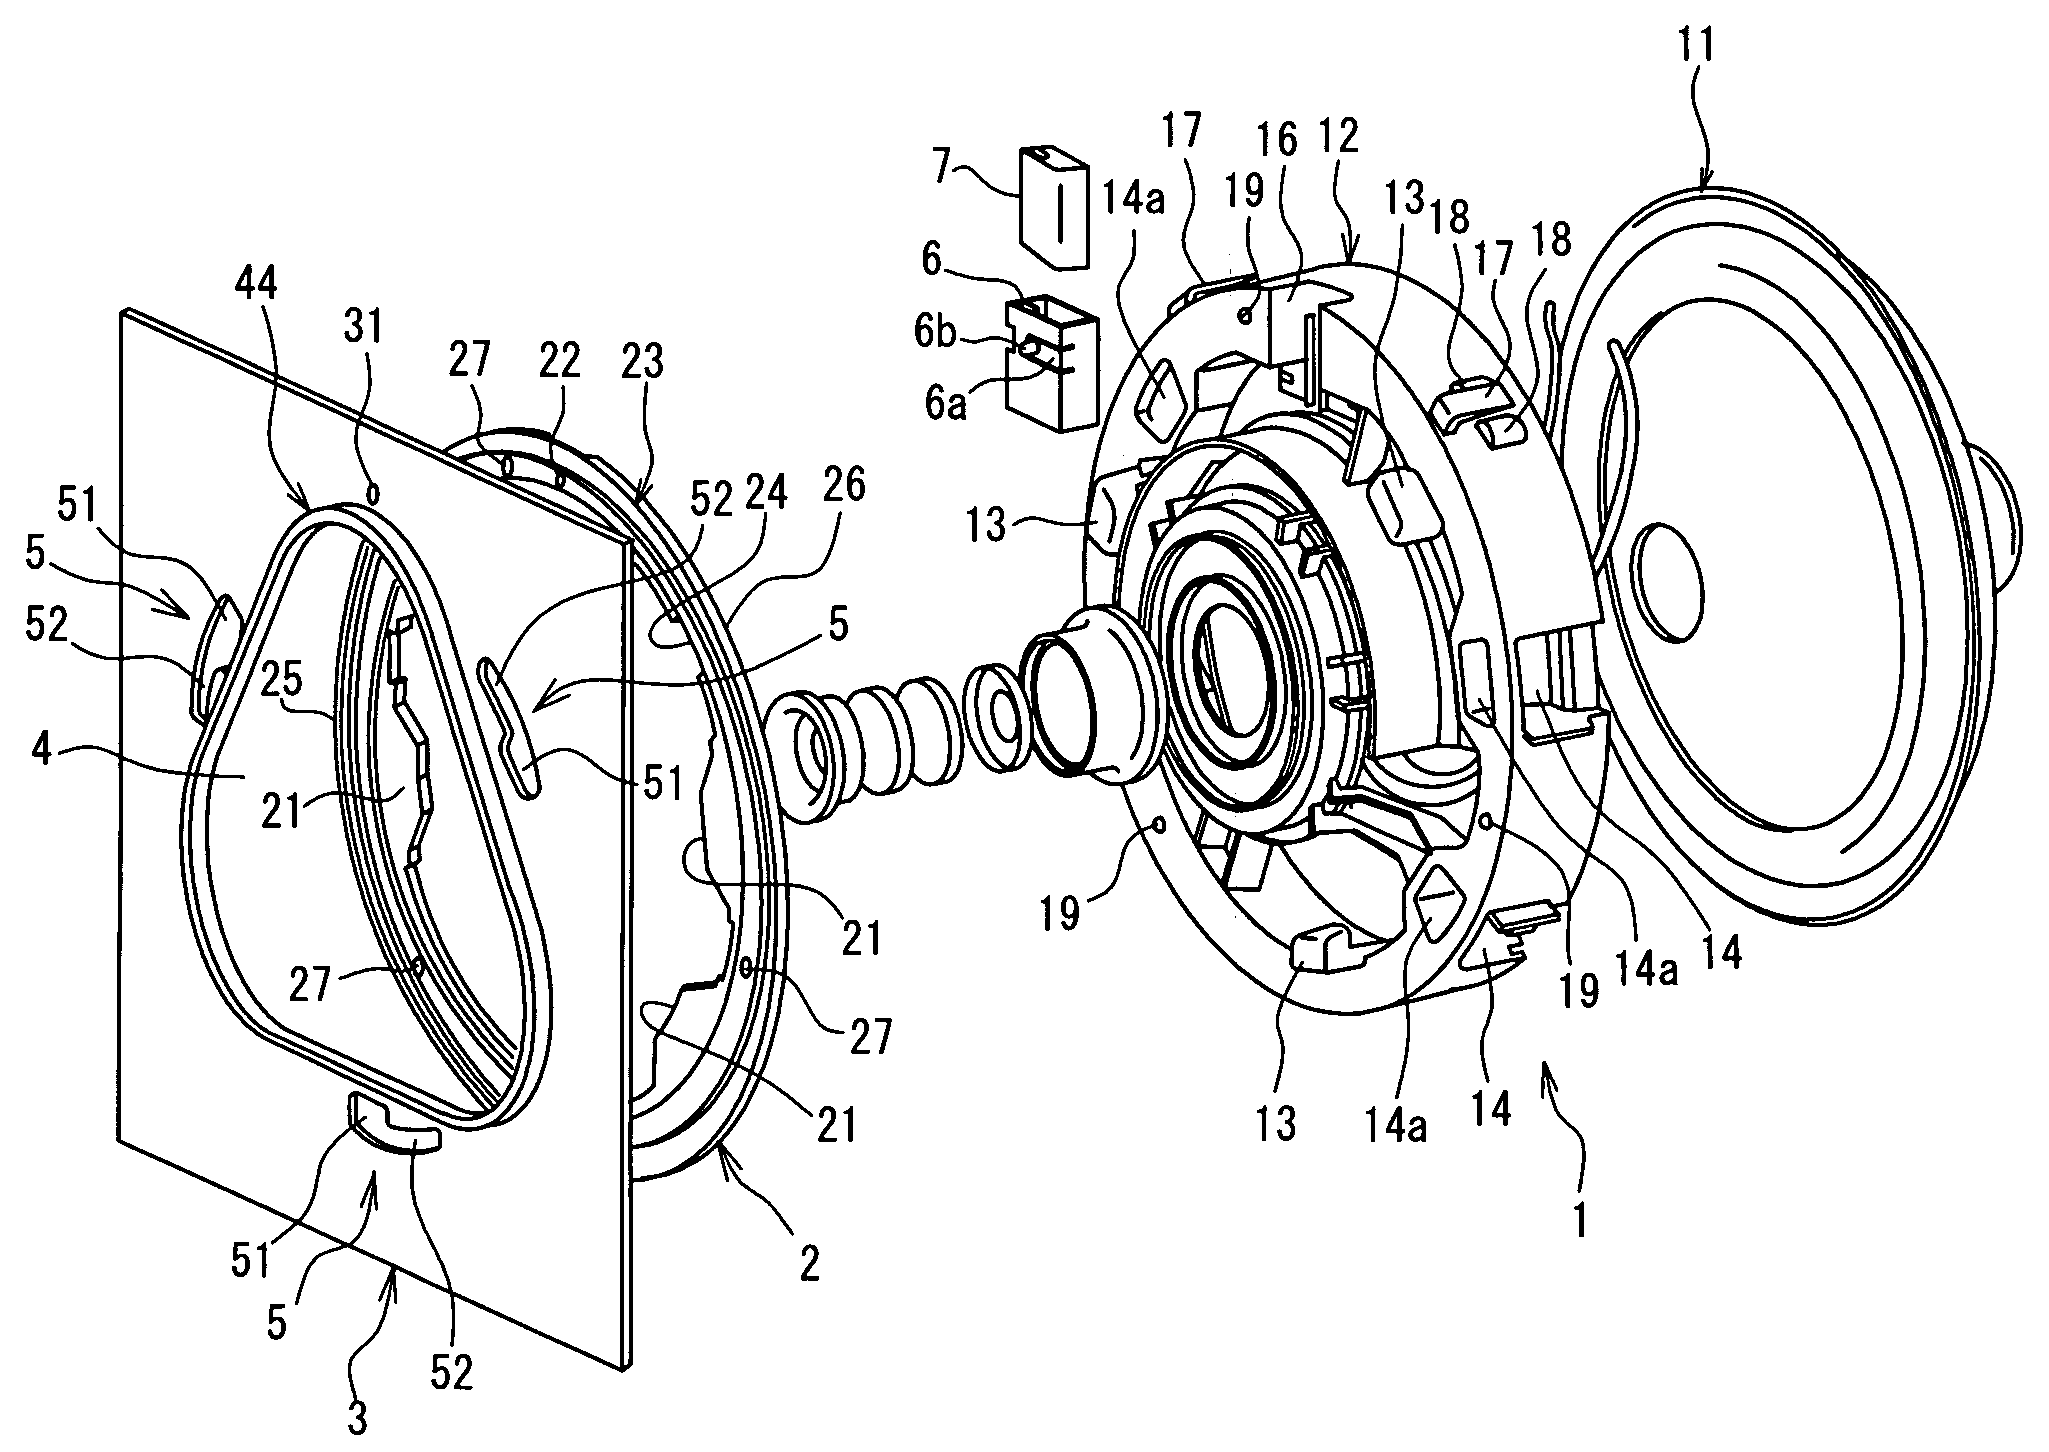 Speaker for vehicle and mounting structure of the speaker